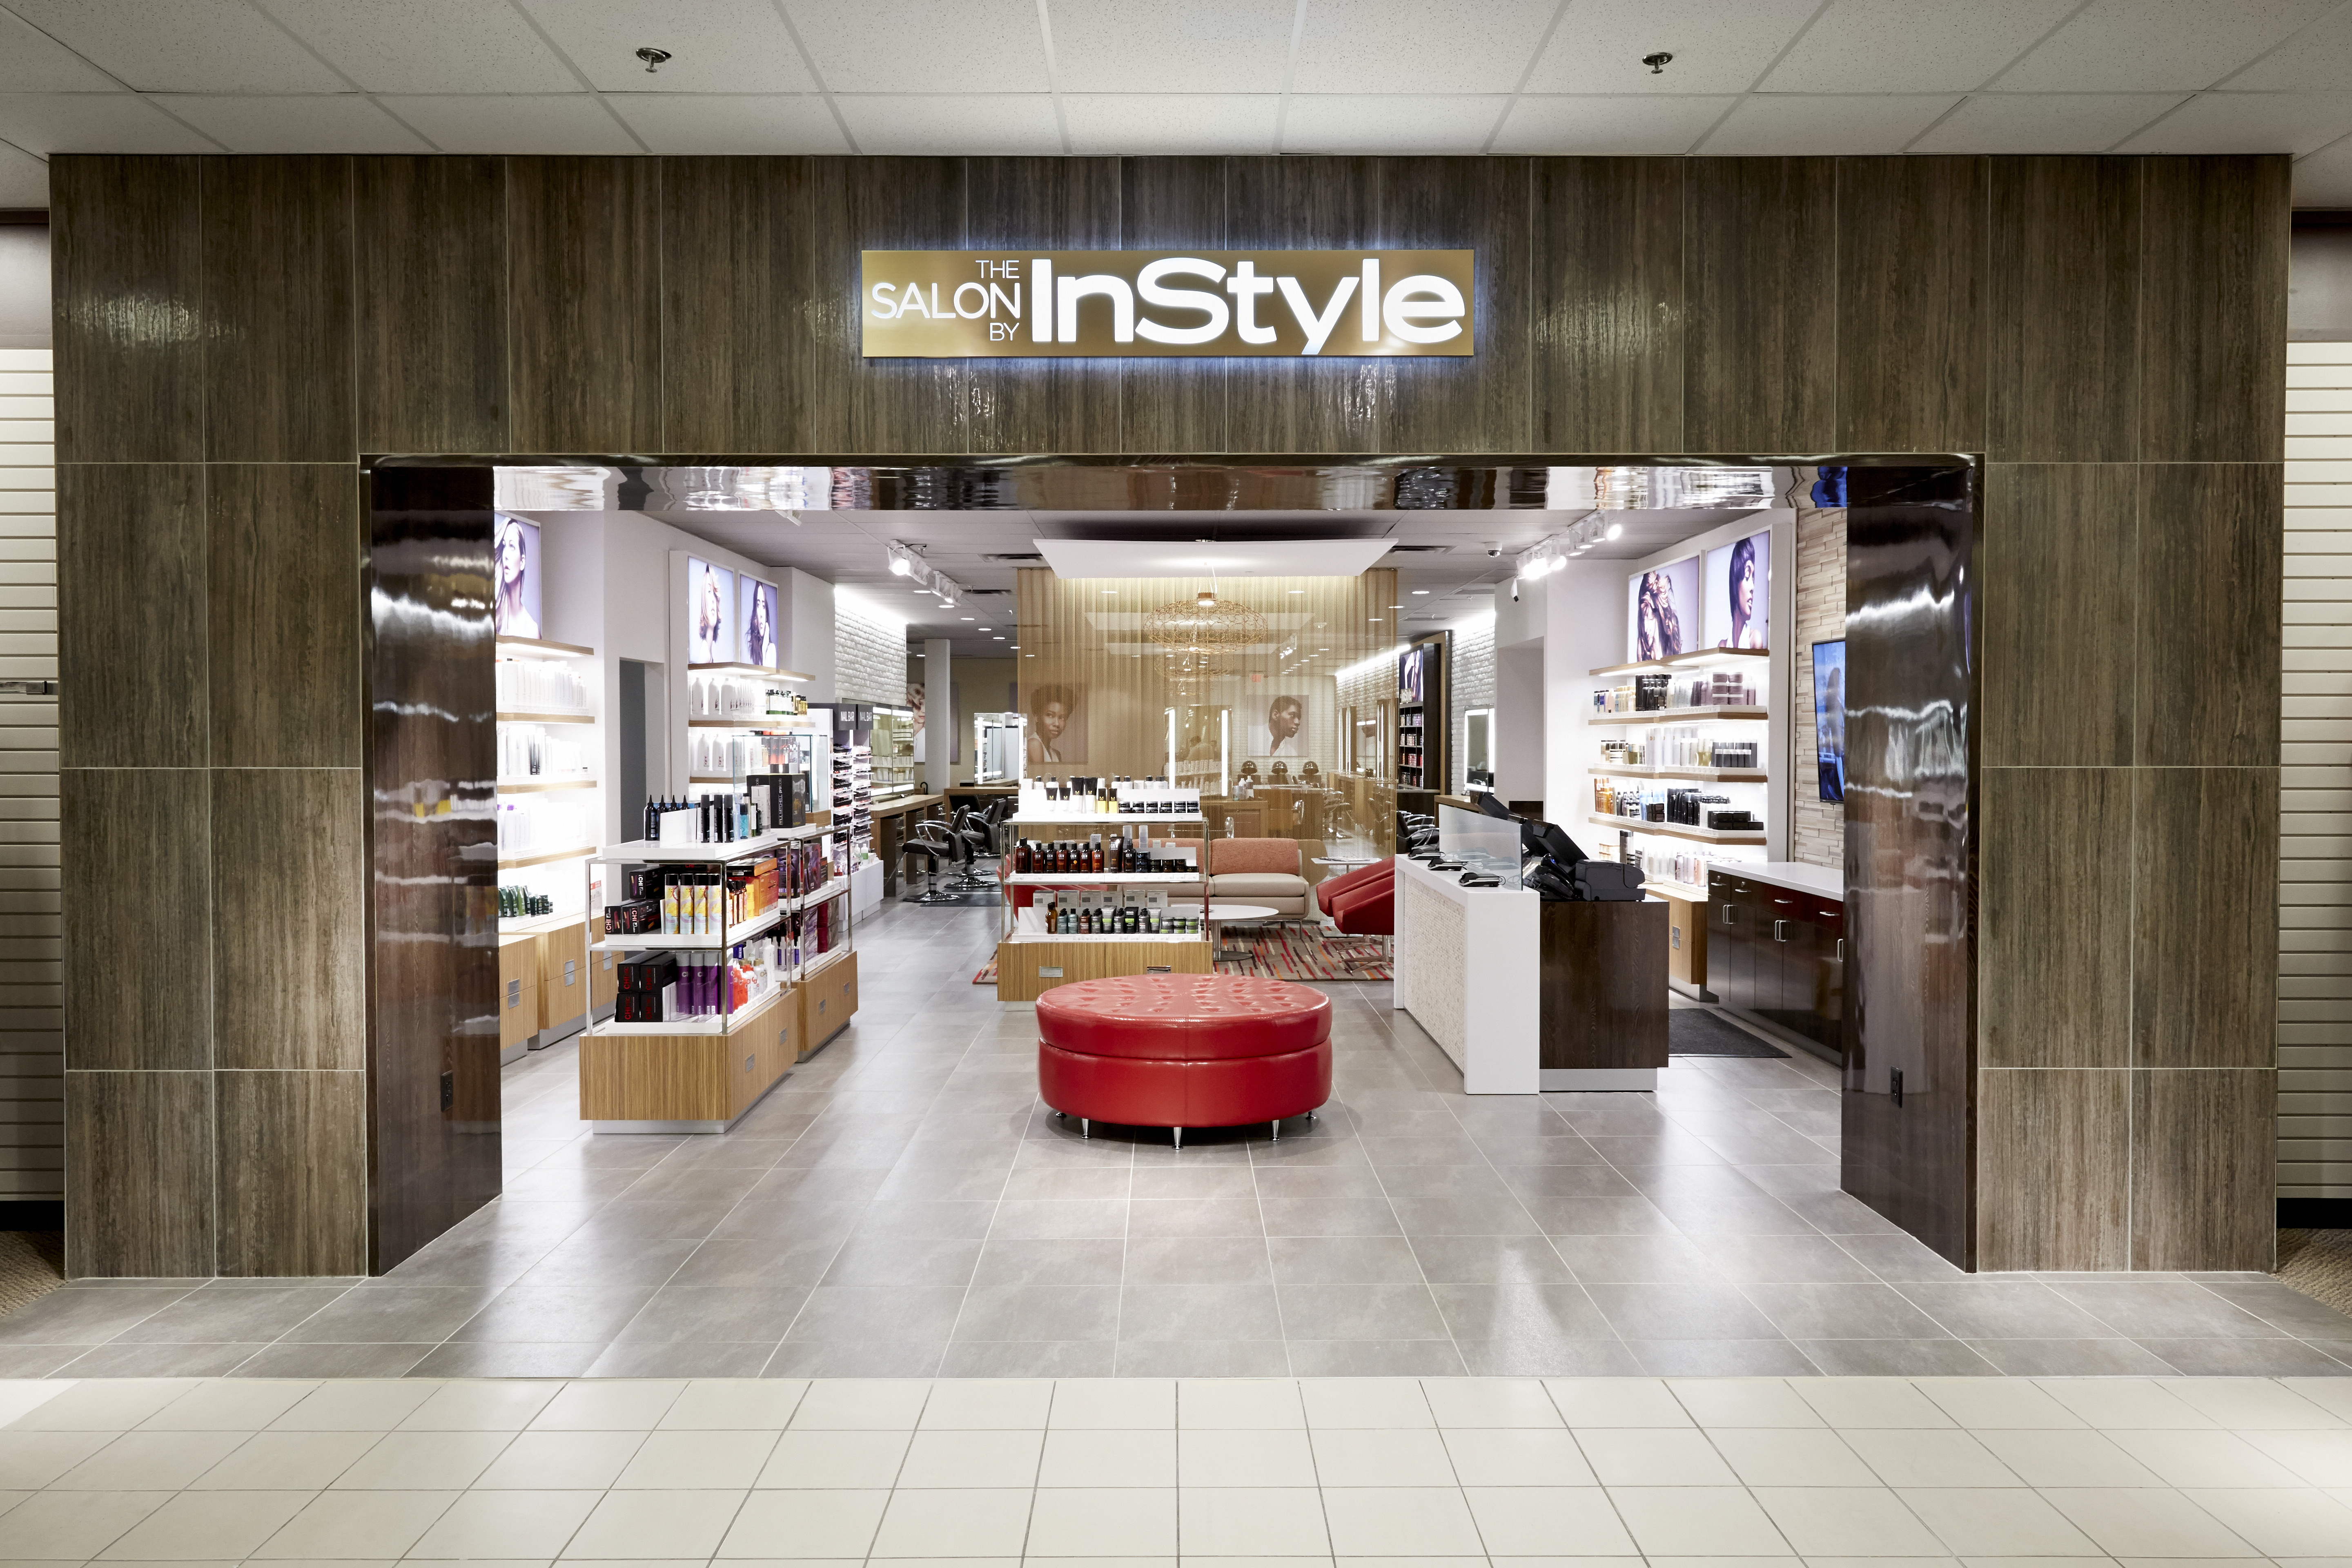 JCPenney Adds Volume to its Salon Business with Plans to Hire 6500 Stylists  - Penney IP LLC